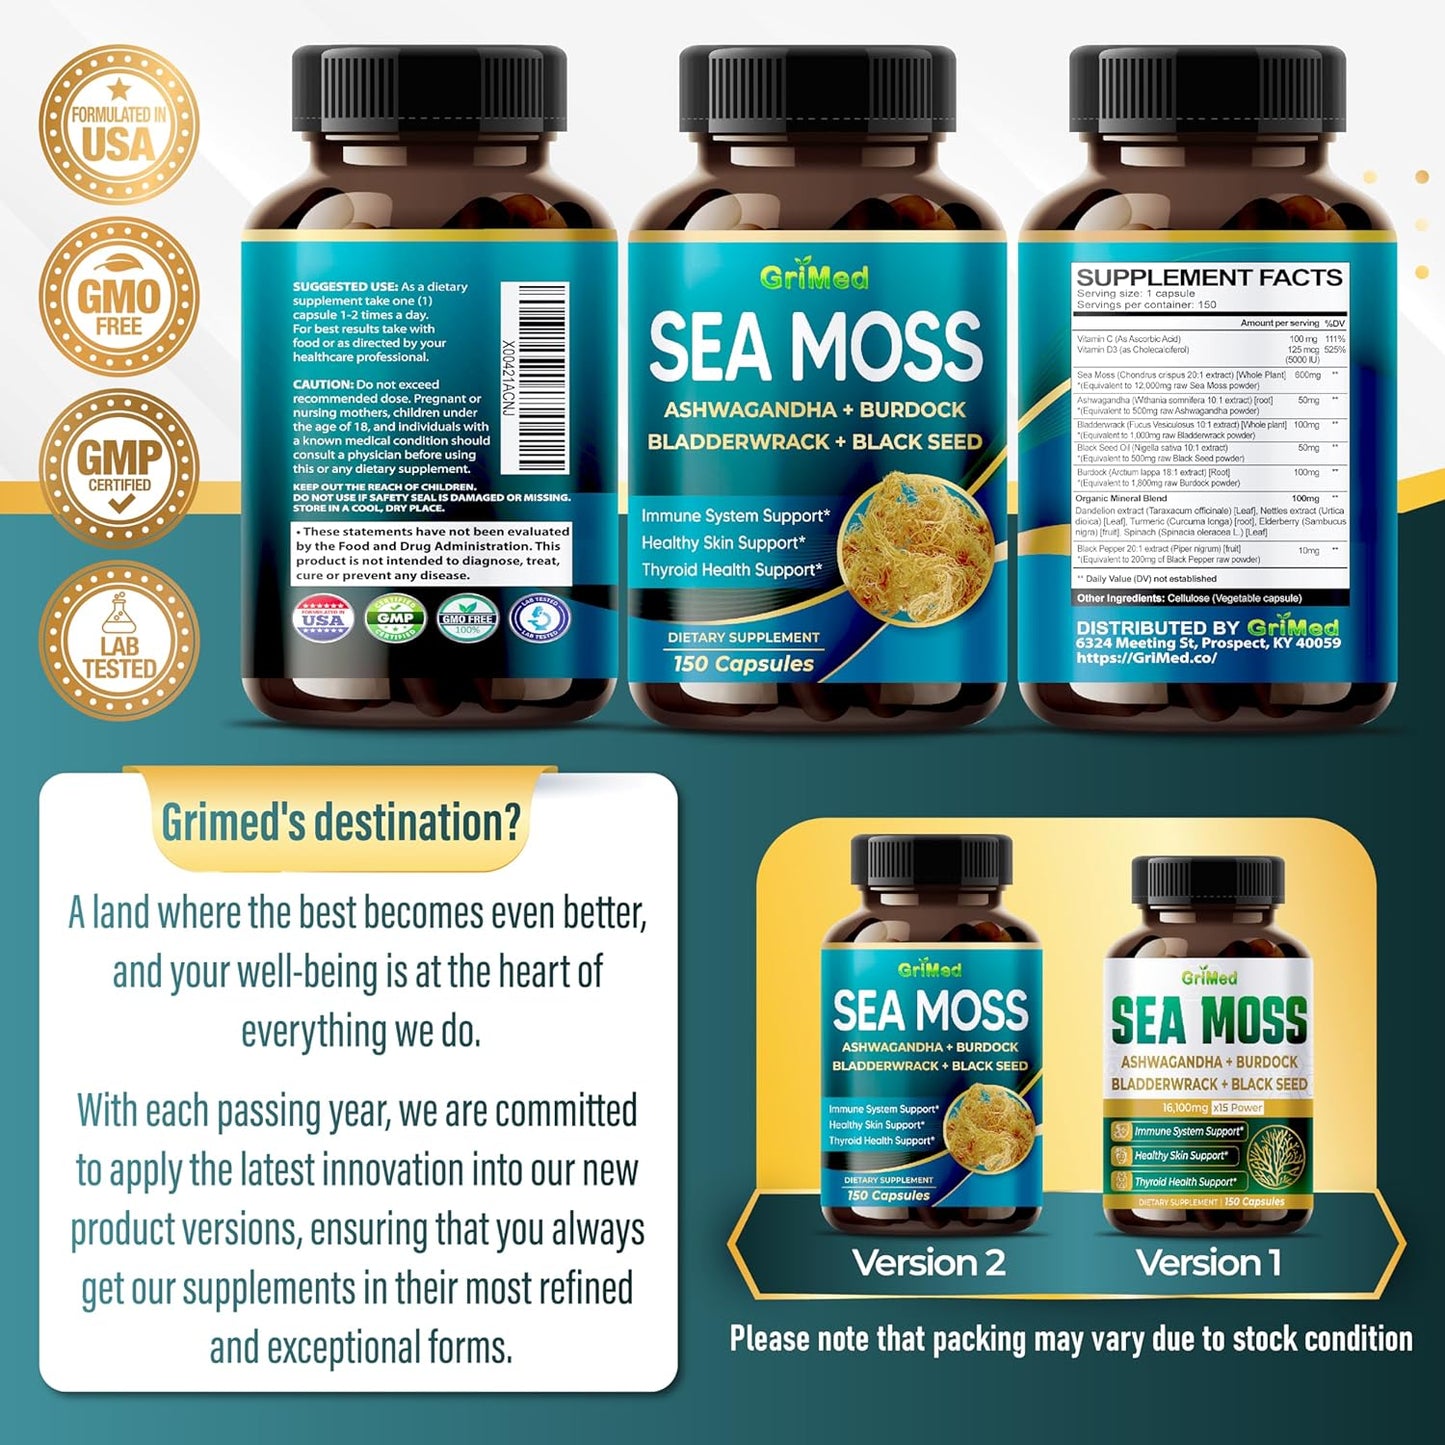 Premium Sea Moss 30:1 Extract 16,100Mg with Ashwagandha, Burdock Bladderwrack, Black Seed for Immune System, Skin, Digestion & Energy- Made in the USA (150 Count (Pack of 1))